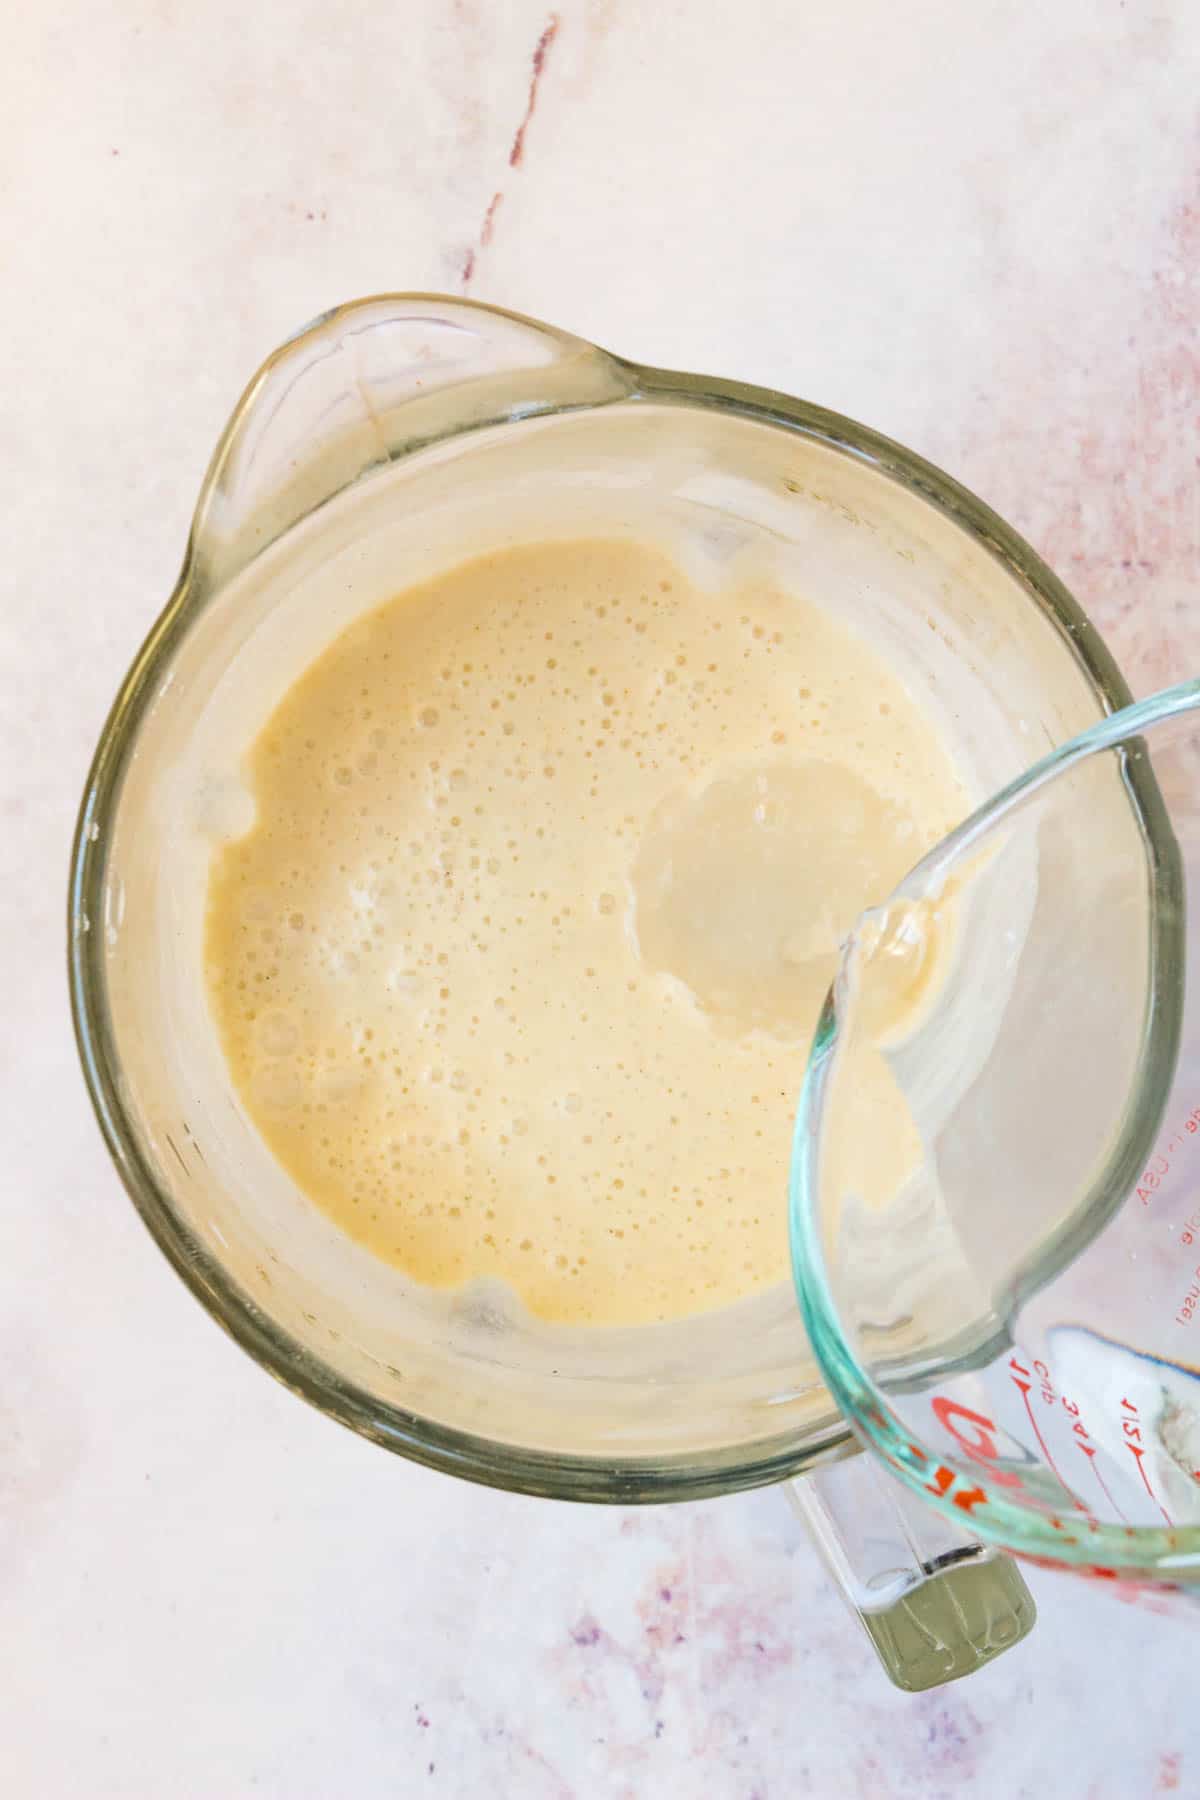 Water is added into the blender with crepe batter.